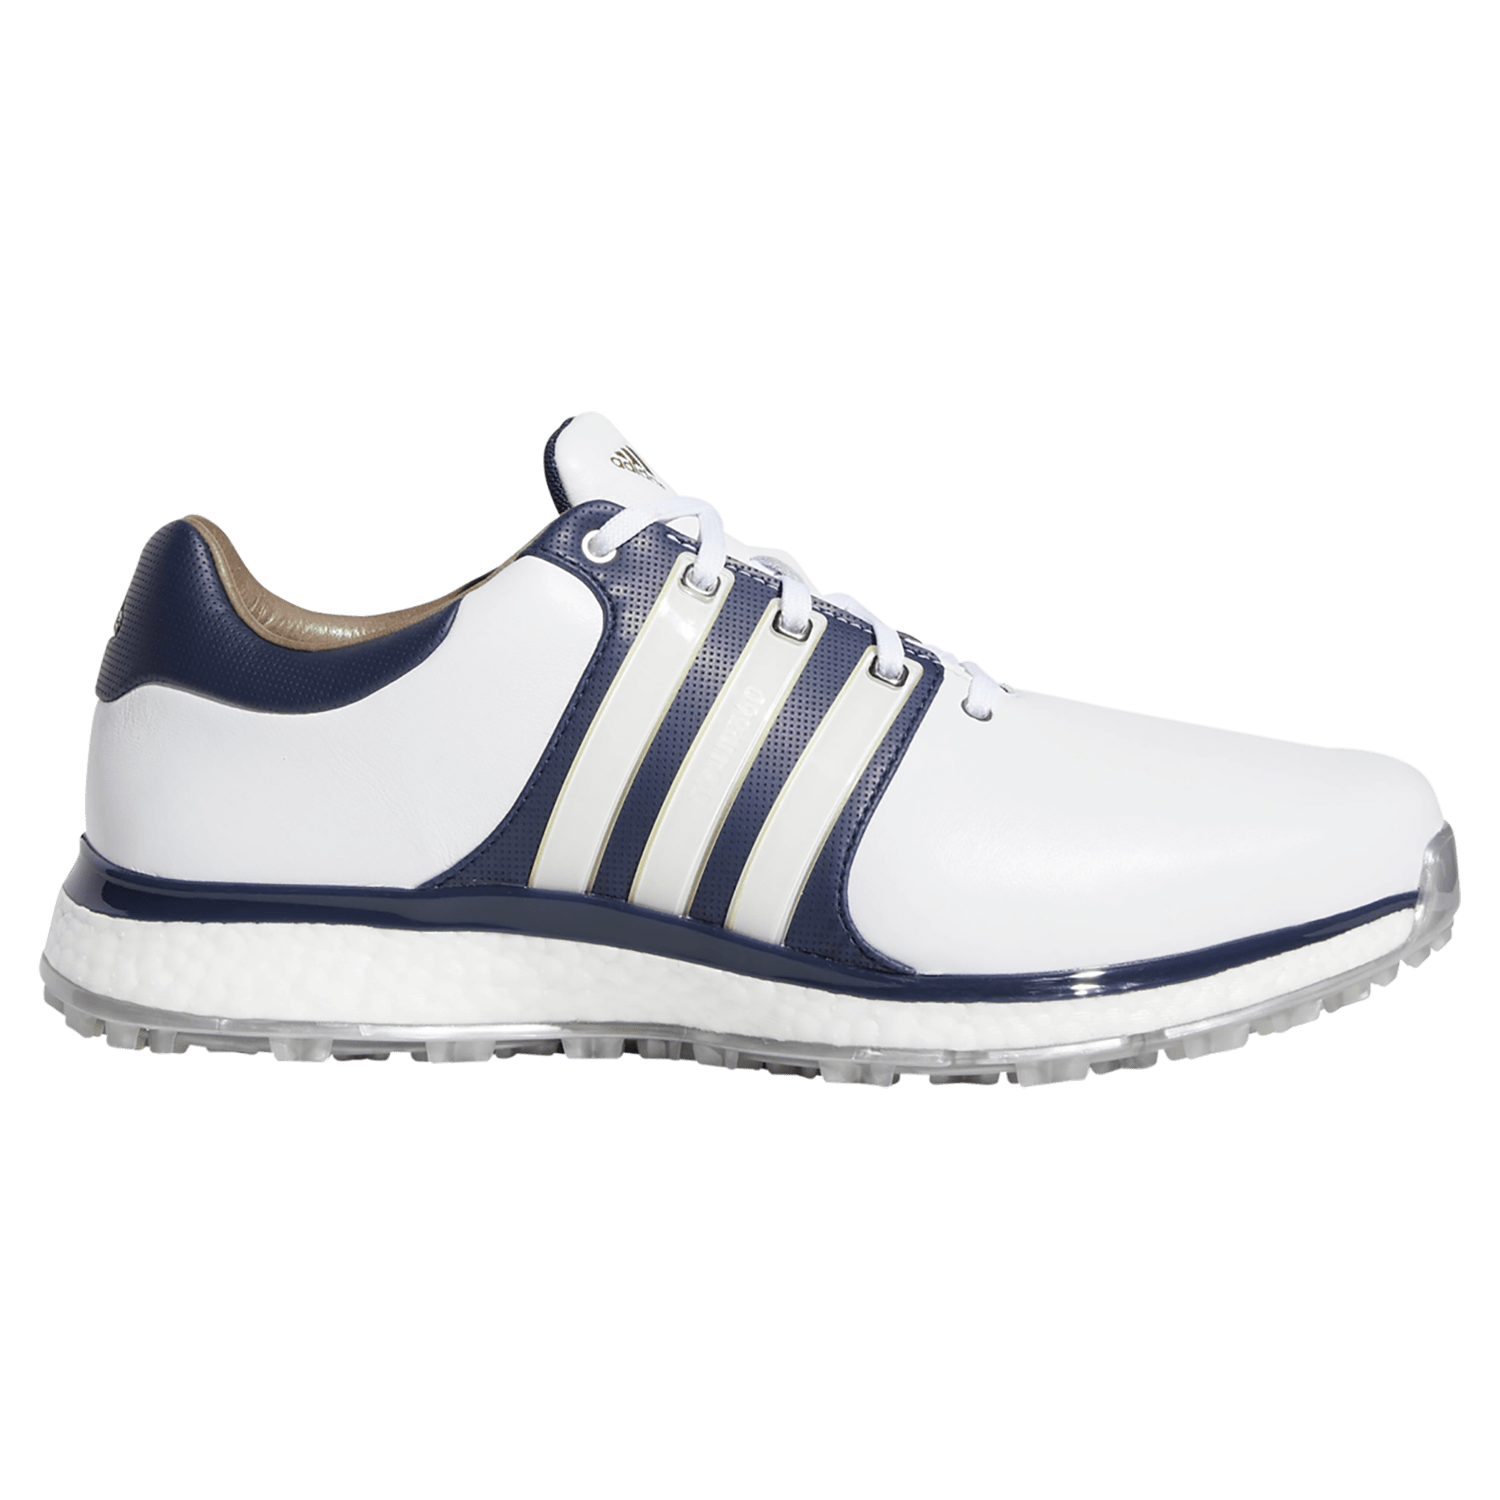 adidas golf shoes online